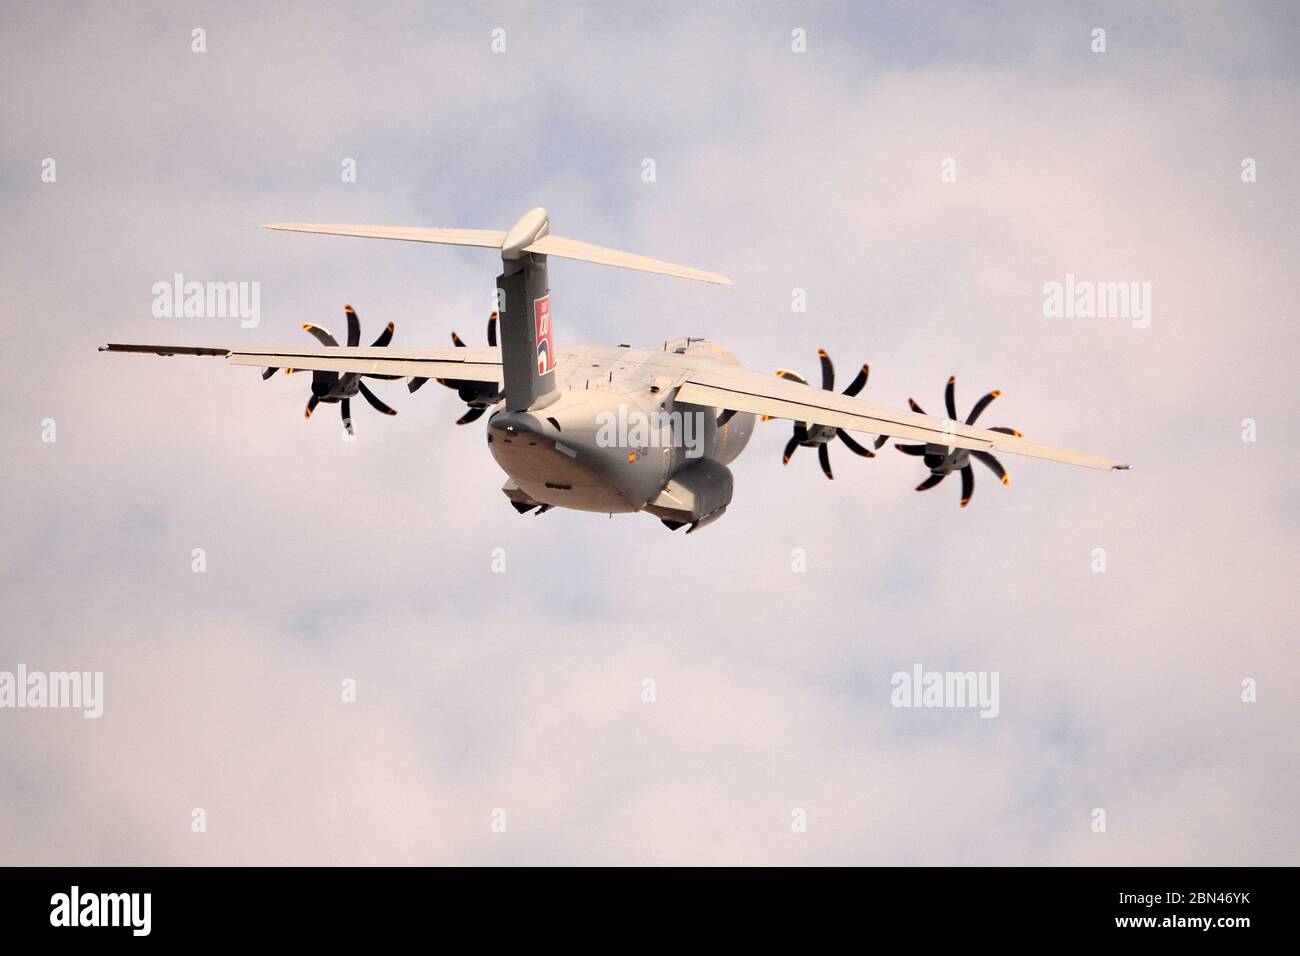 Airbus A400M, RAF Military Transport Aircraft Stockfoto